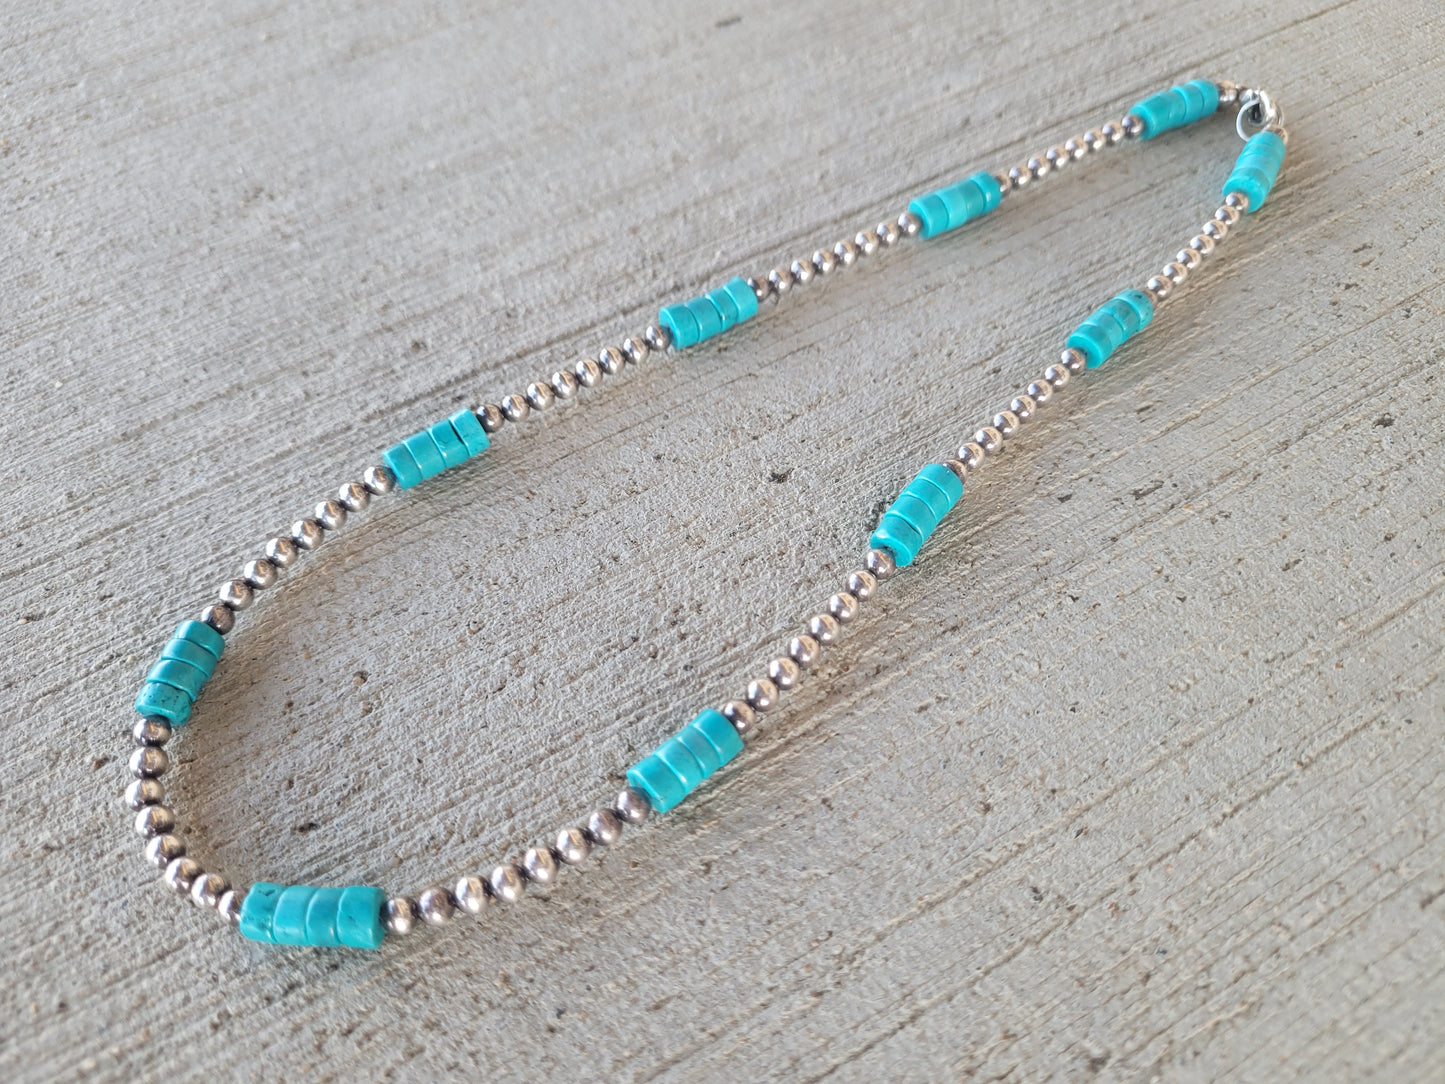 Navajo pearl and turquoise necklace